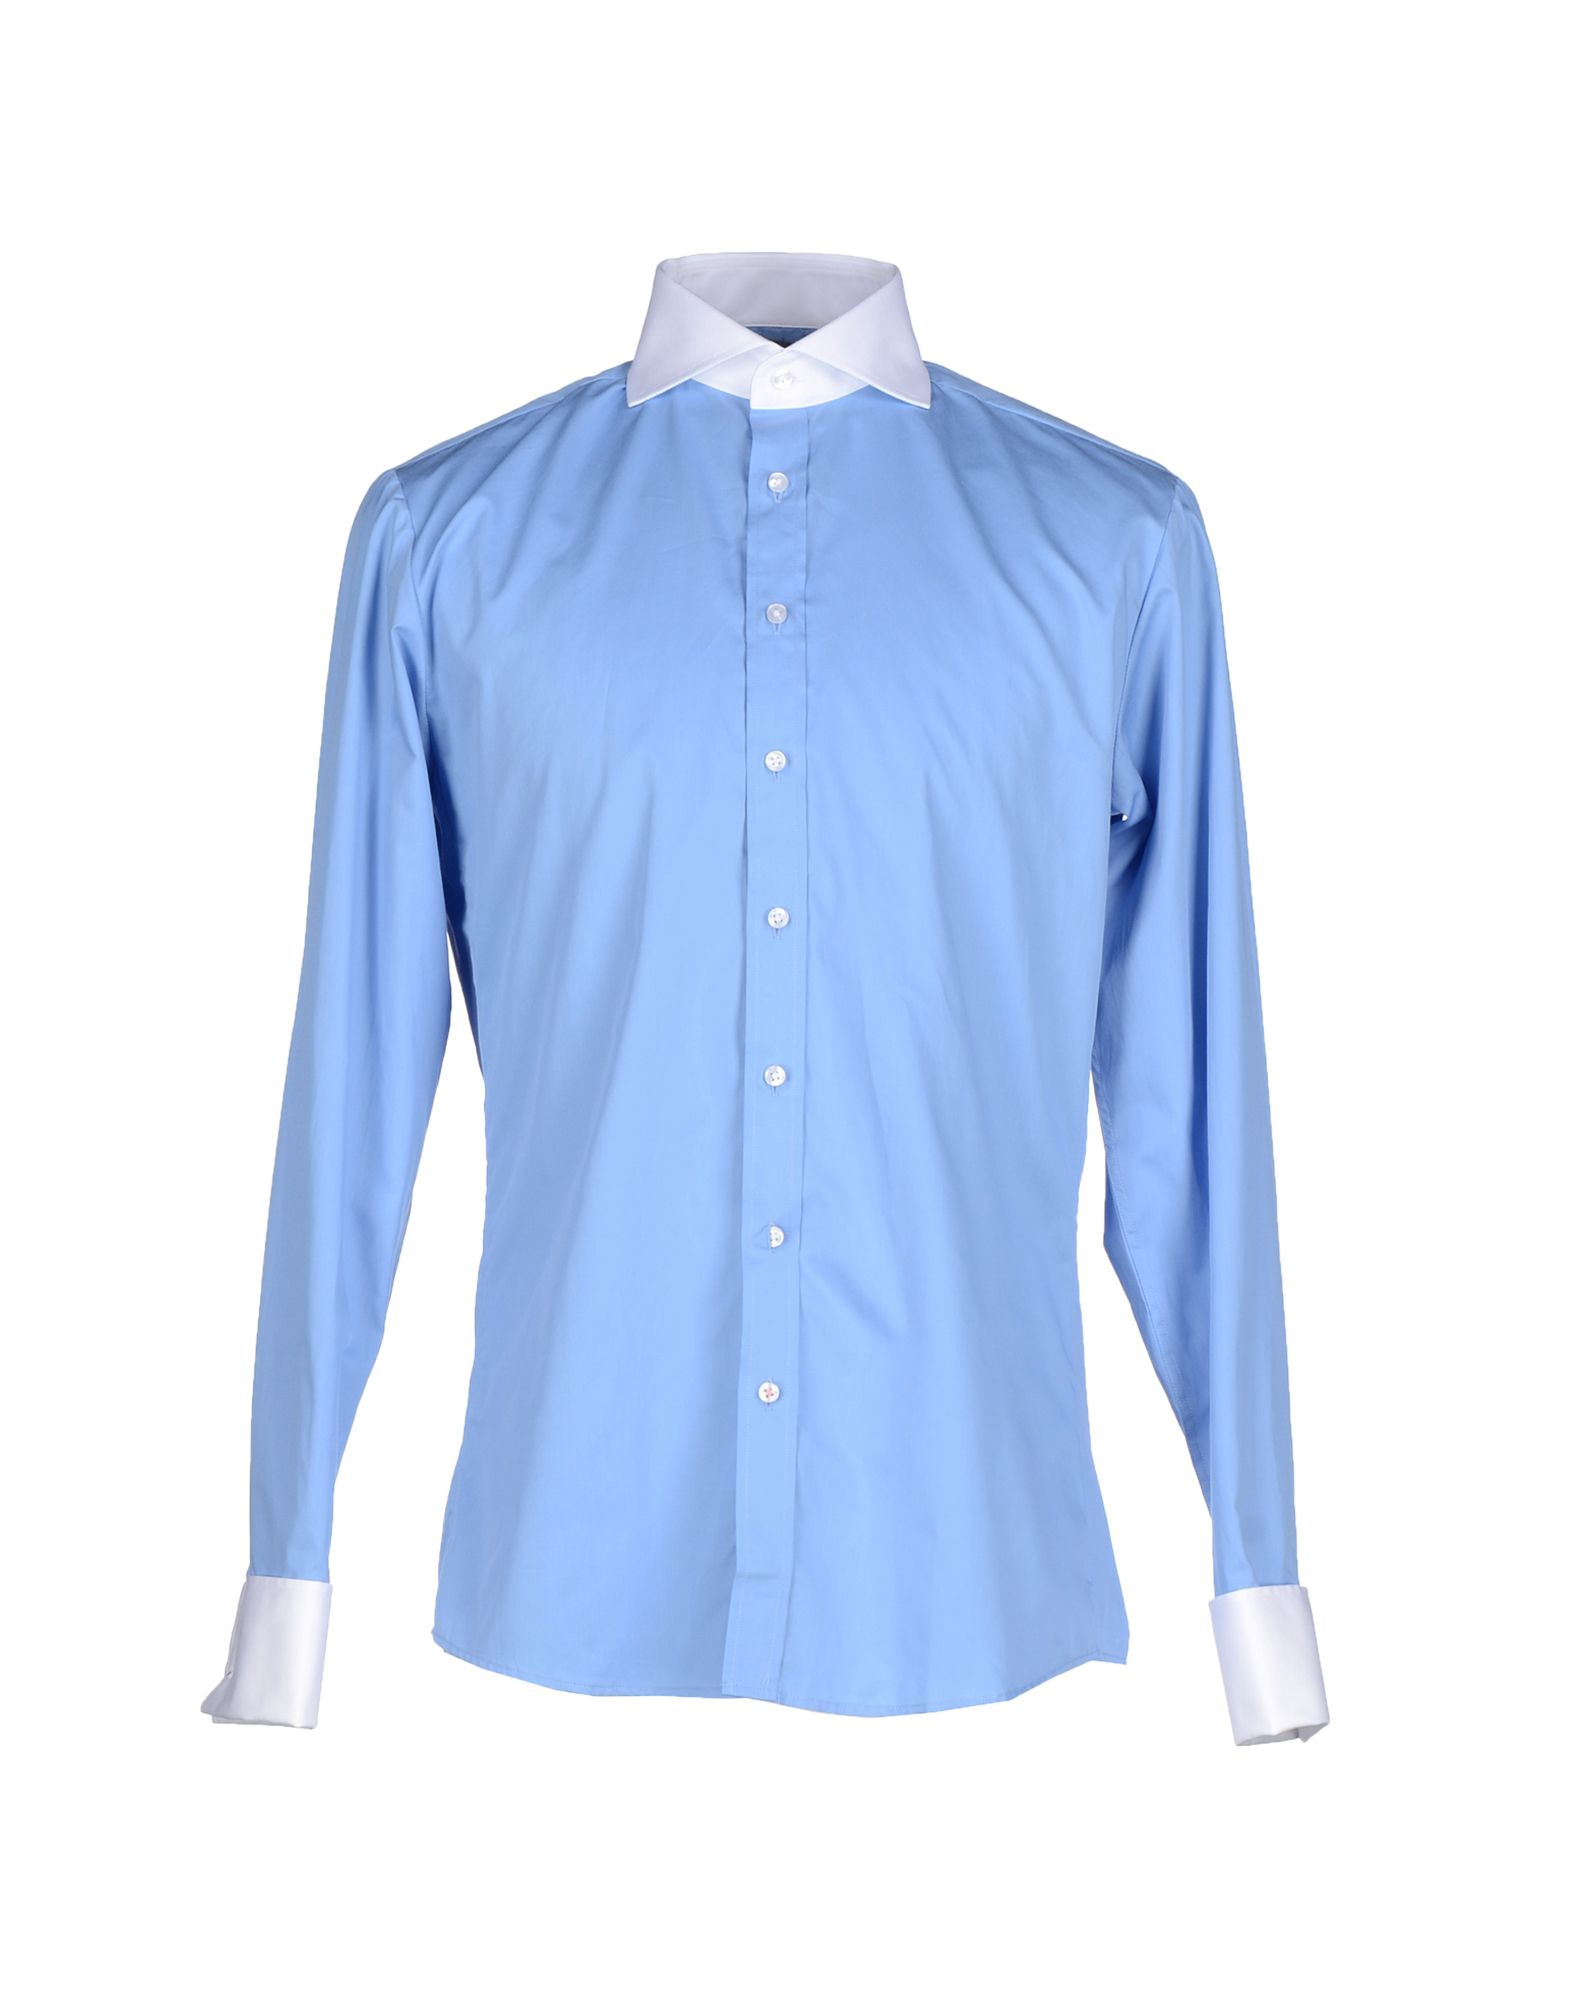 Lyst - Thomas pink Shirt in Blue for Men